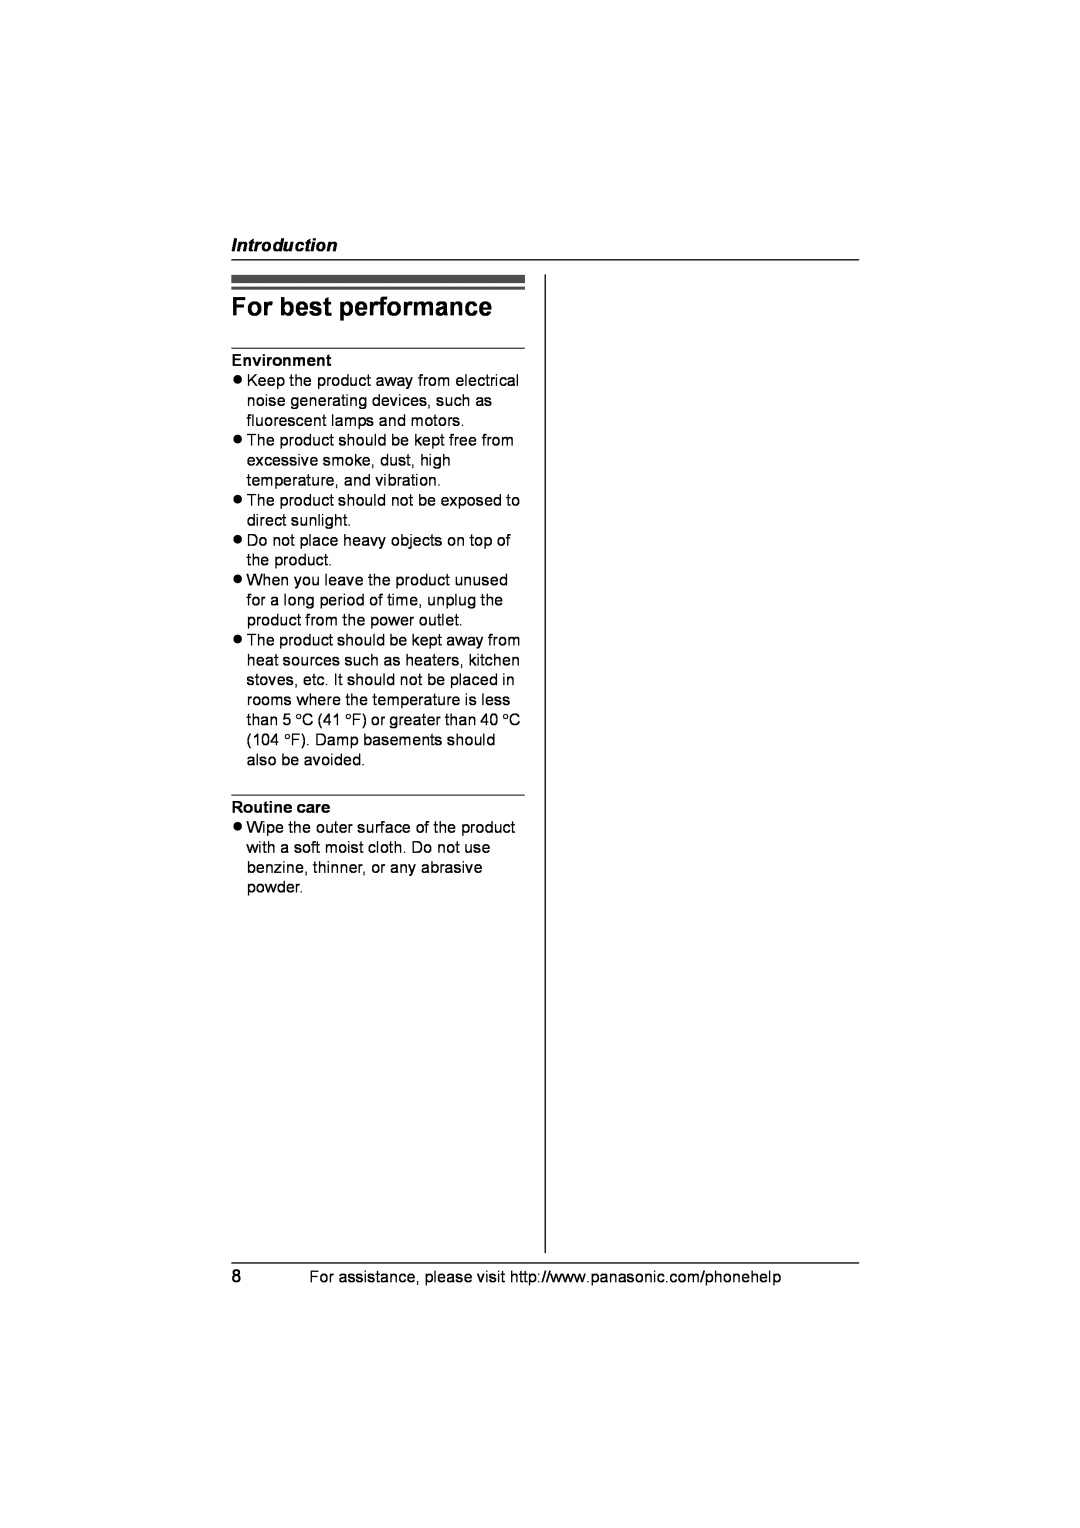 Panasonic KX-TS4100 operating instructions For best performance, Environment, Routine care, Introduction 